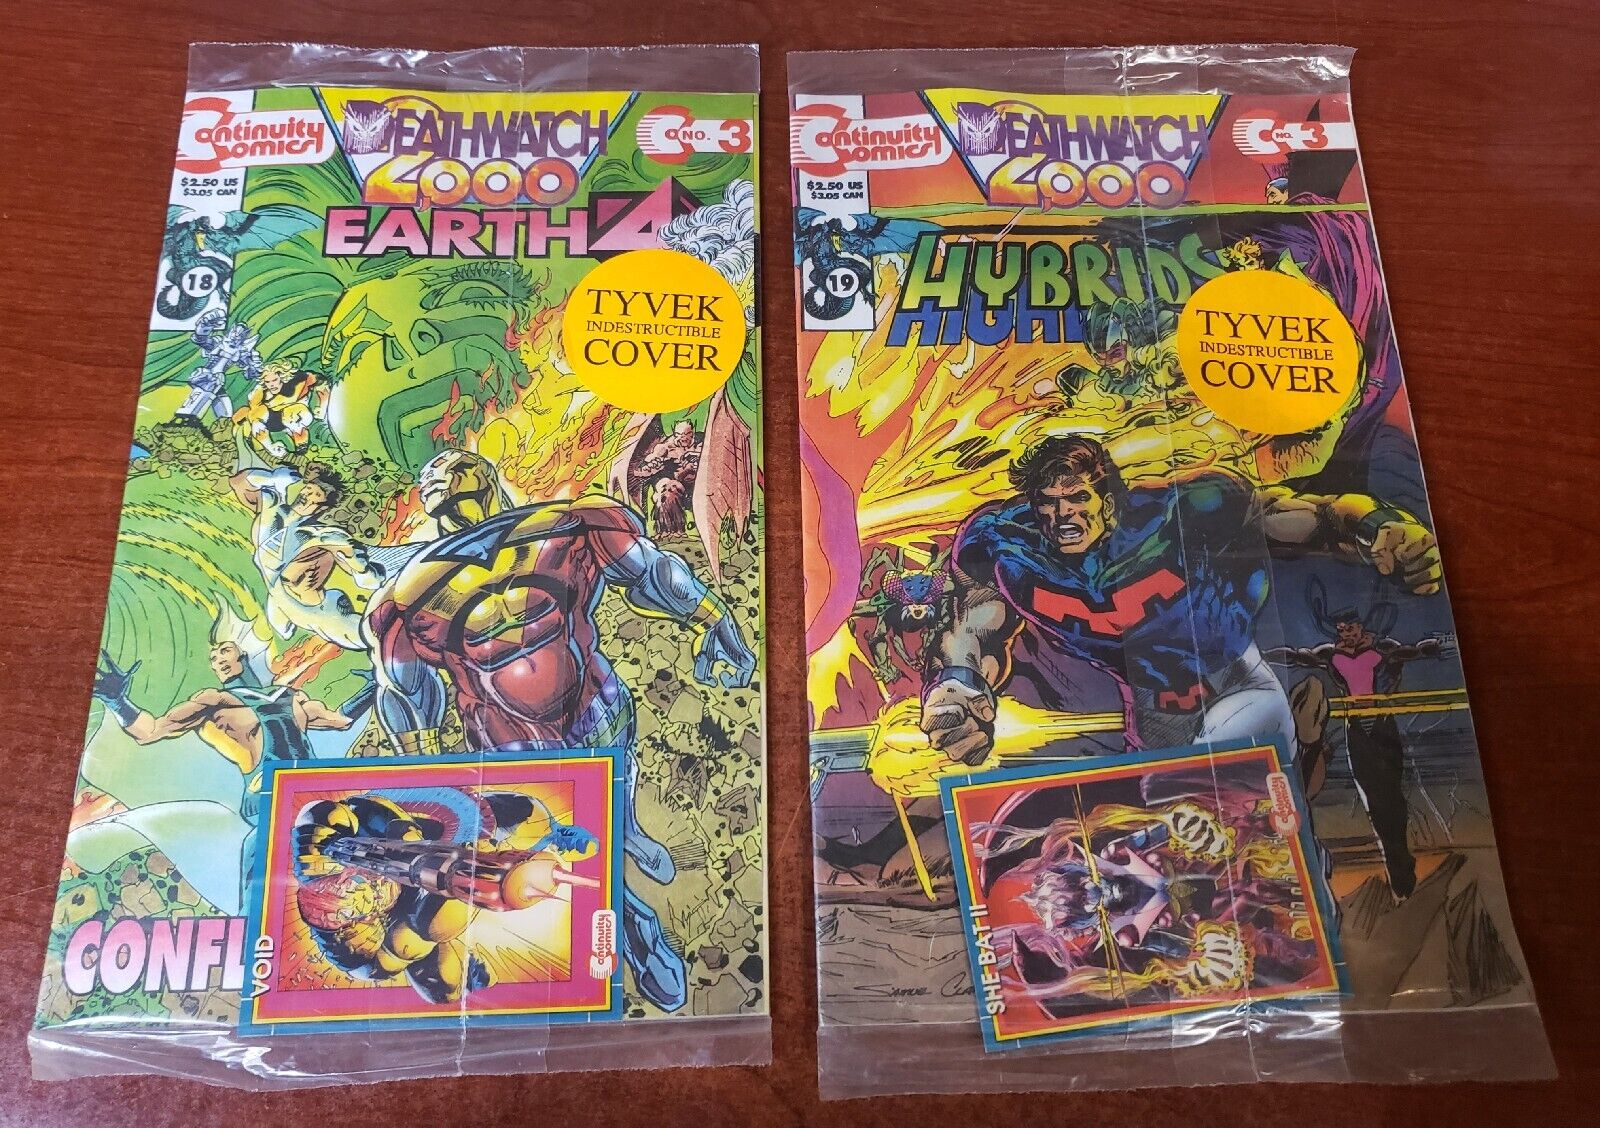 DEATHWATCH 2000 EARTH 4 & HYBRIDS 3 (LOT OF 80) CONTINUITY COMICS PLEASE READ 